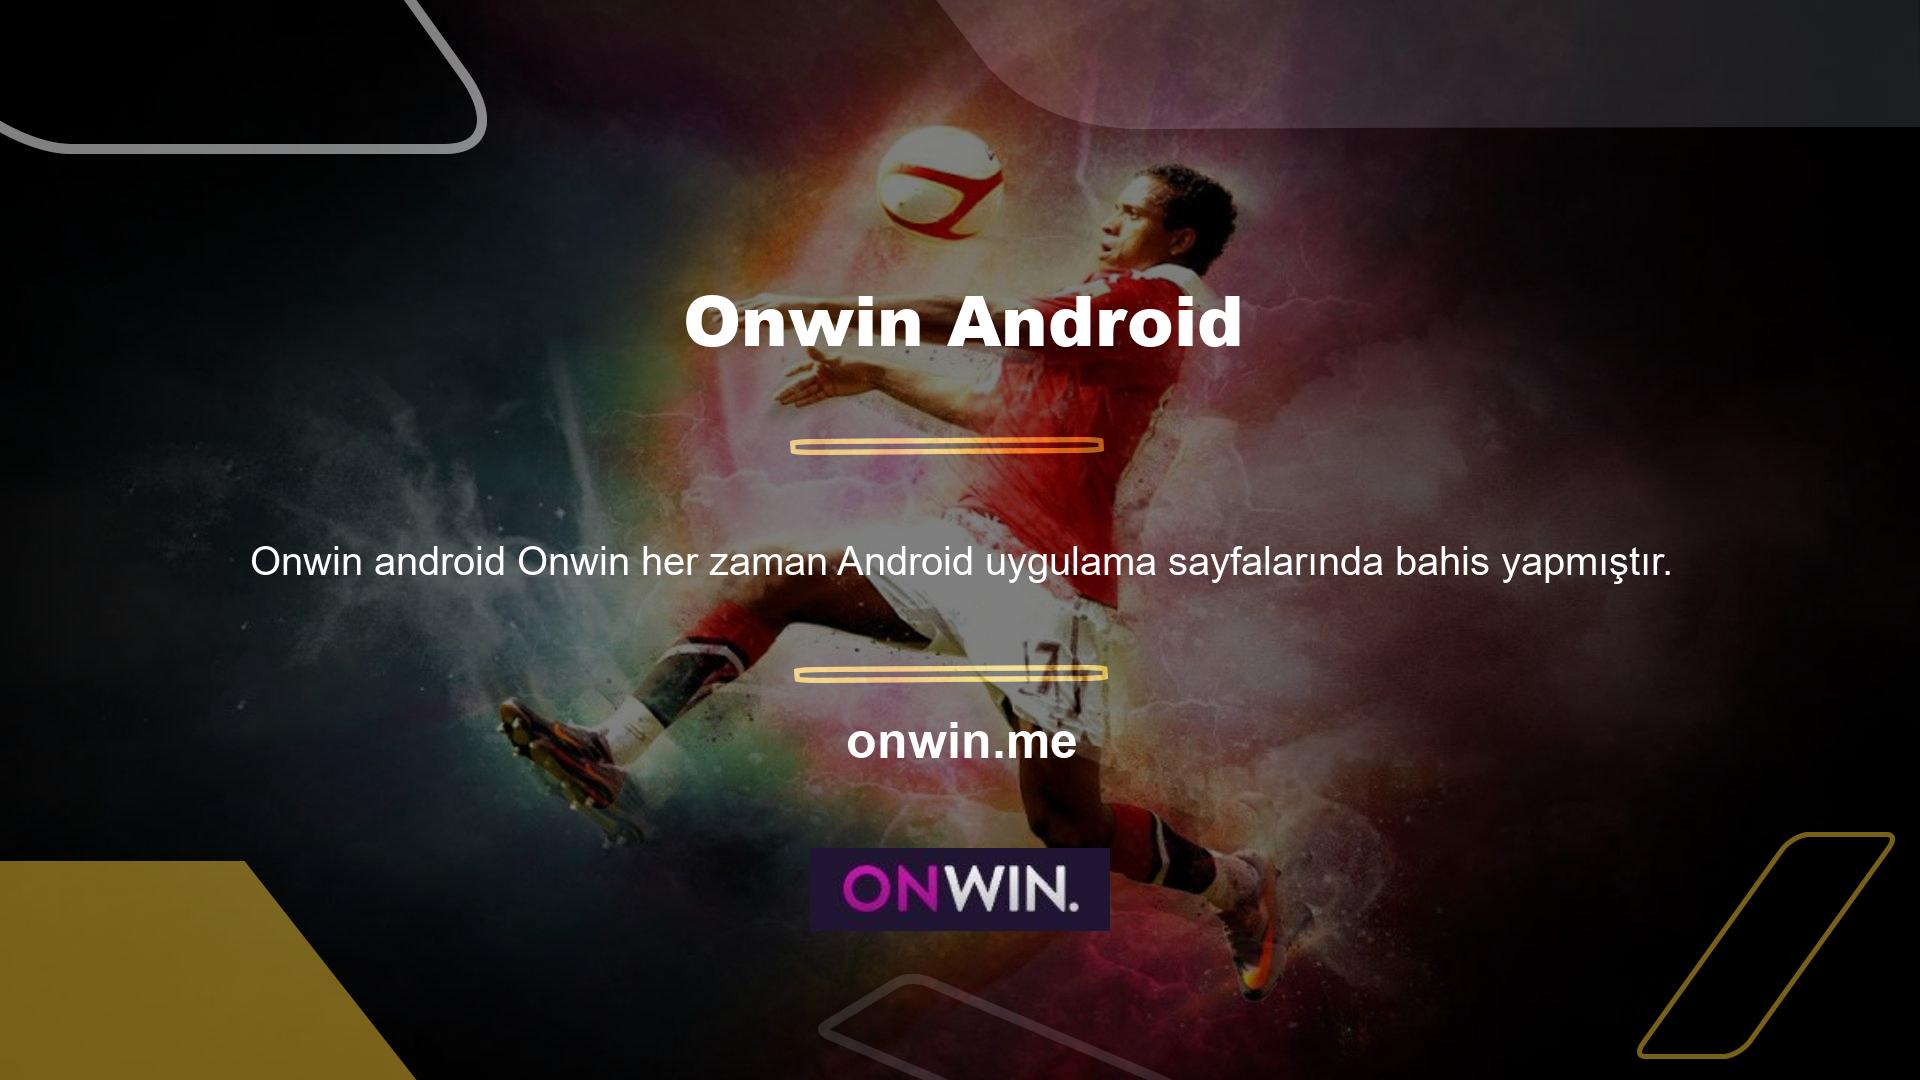 Onwin android